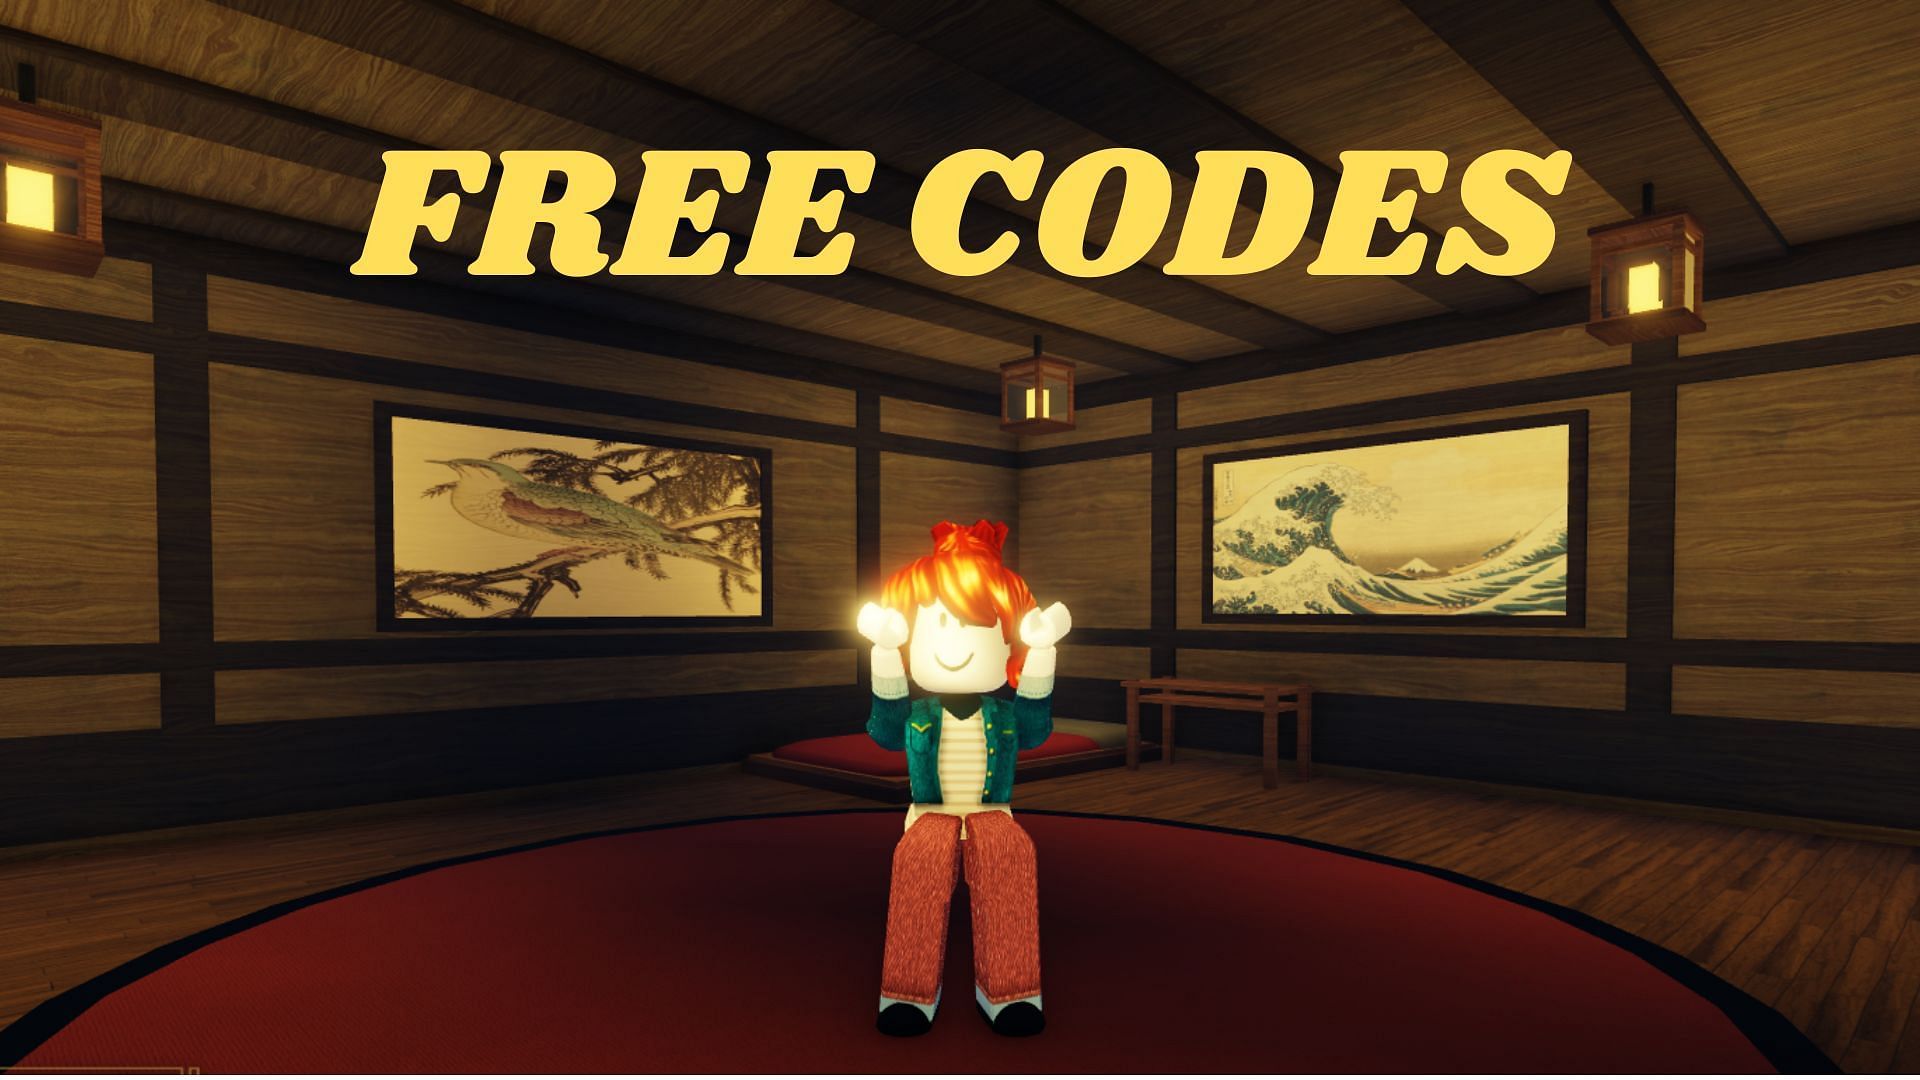 Murim Cultivation Codes should be redeemed soon (Image via Roblox)